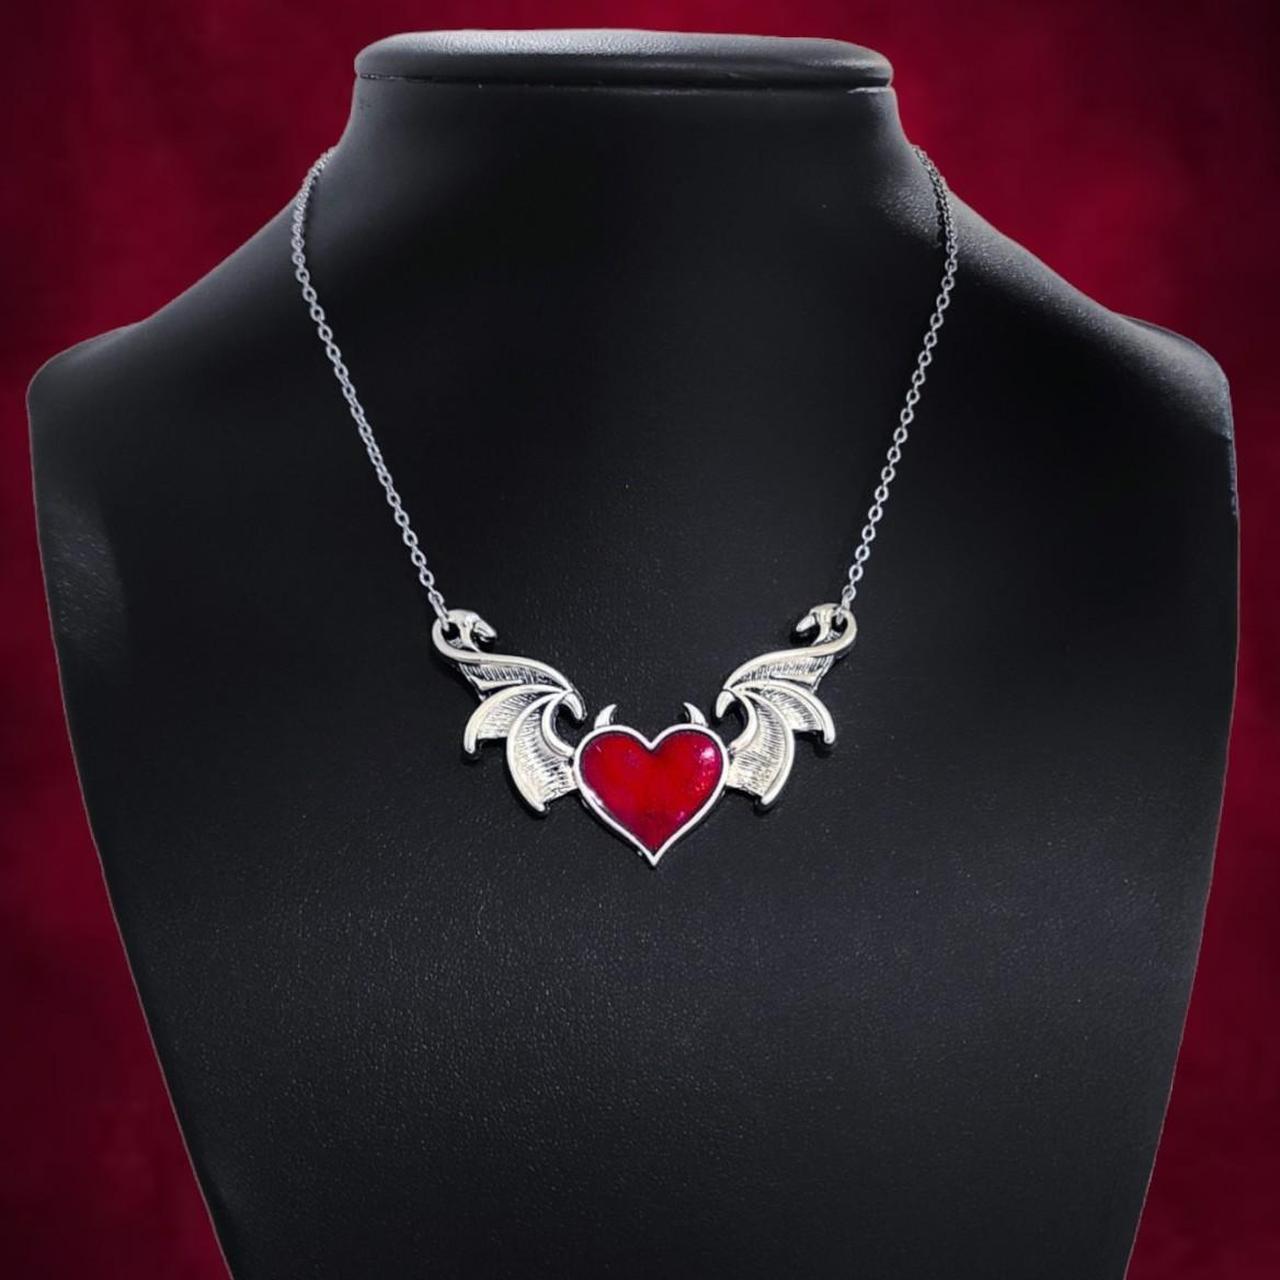 Product Image 1 - Red Batwing Heart Necklace
...
Red Enamel